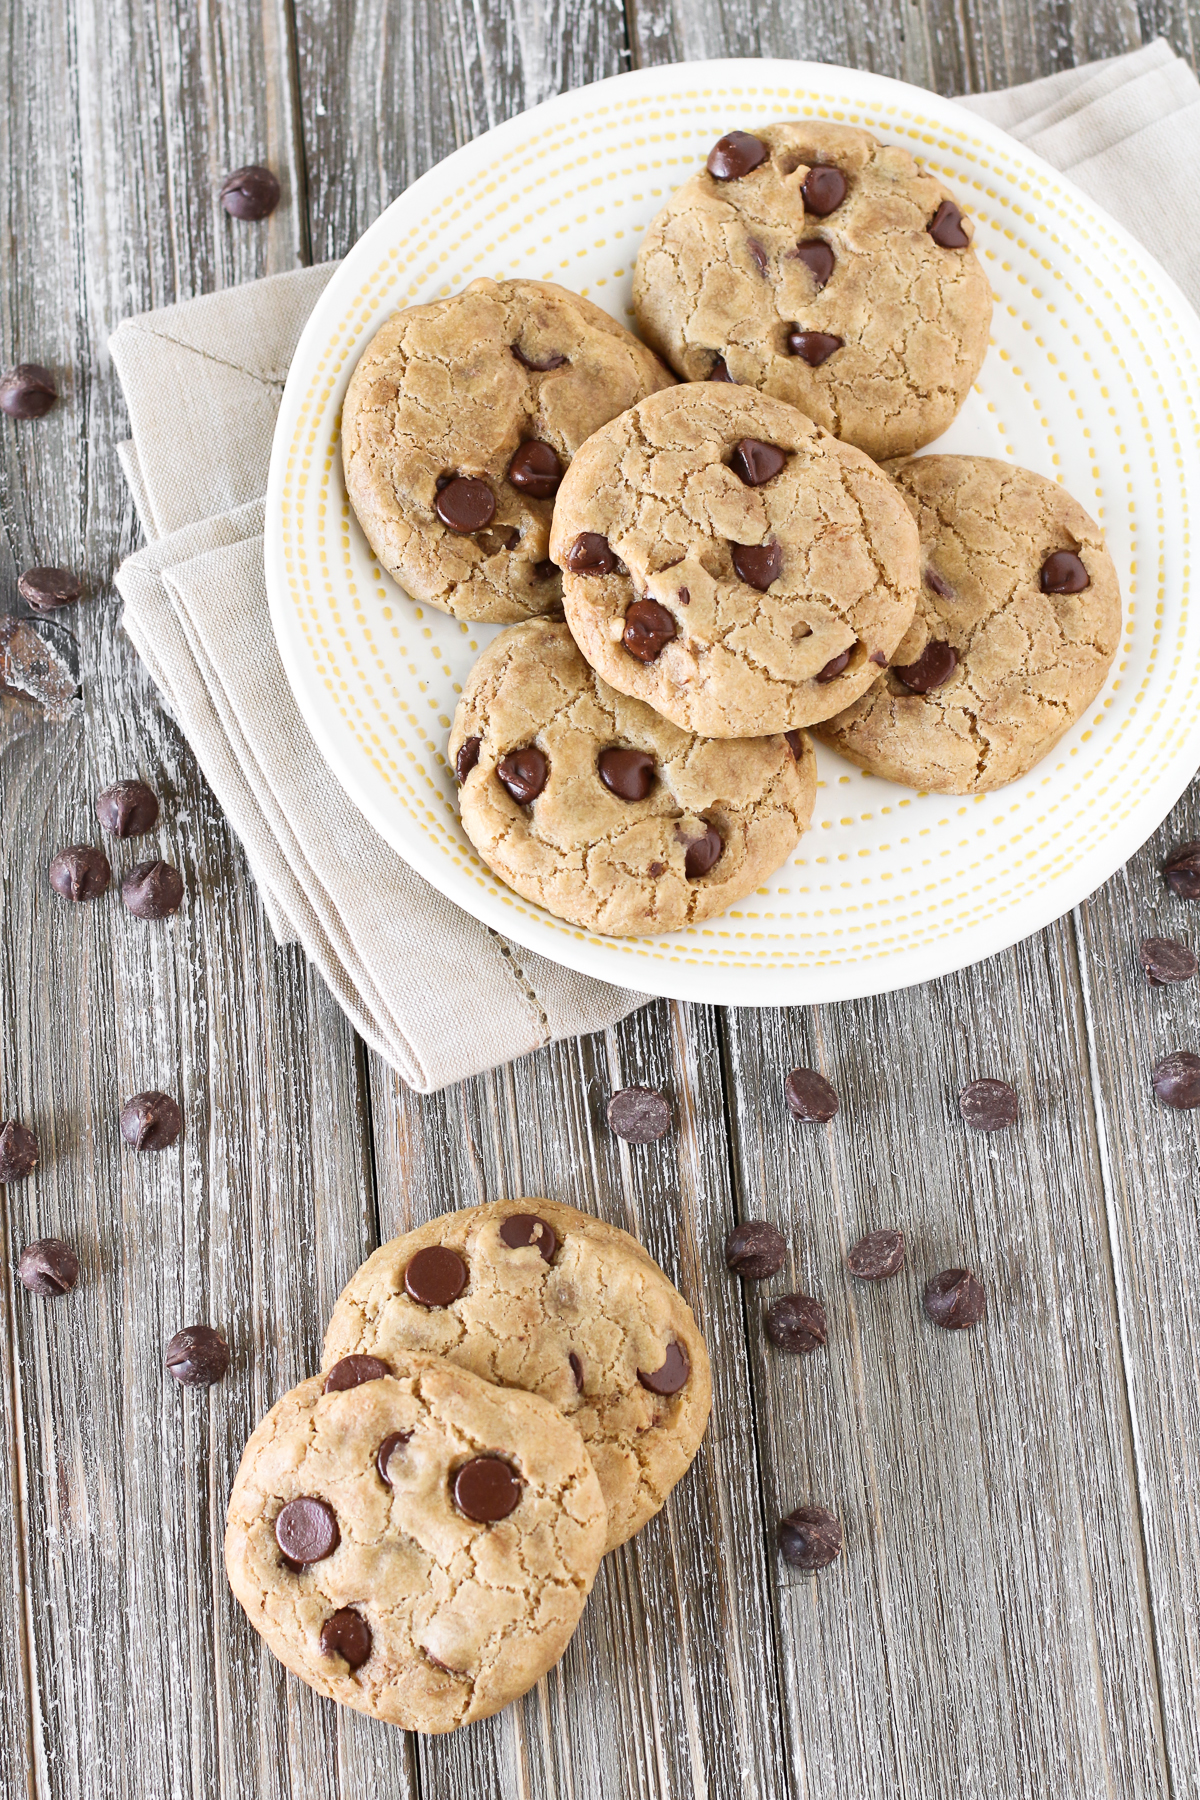 The Perfect Gluten Free Vegan Chocolate Chip Cookie. Crispy on the edges, gooey and chewy in the center and loaded with chocolate chips. That’s what makes these the BEST chocolate chip cookies!